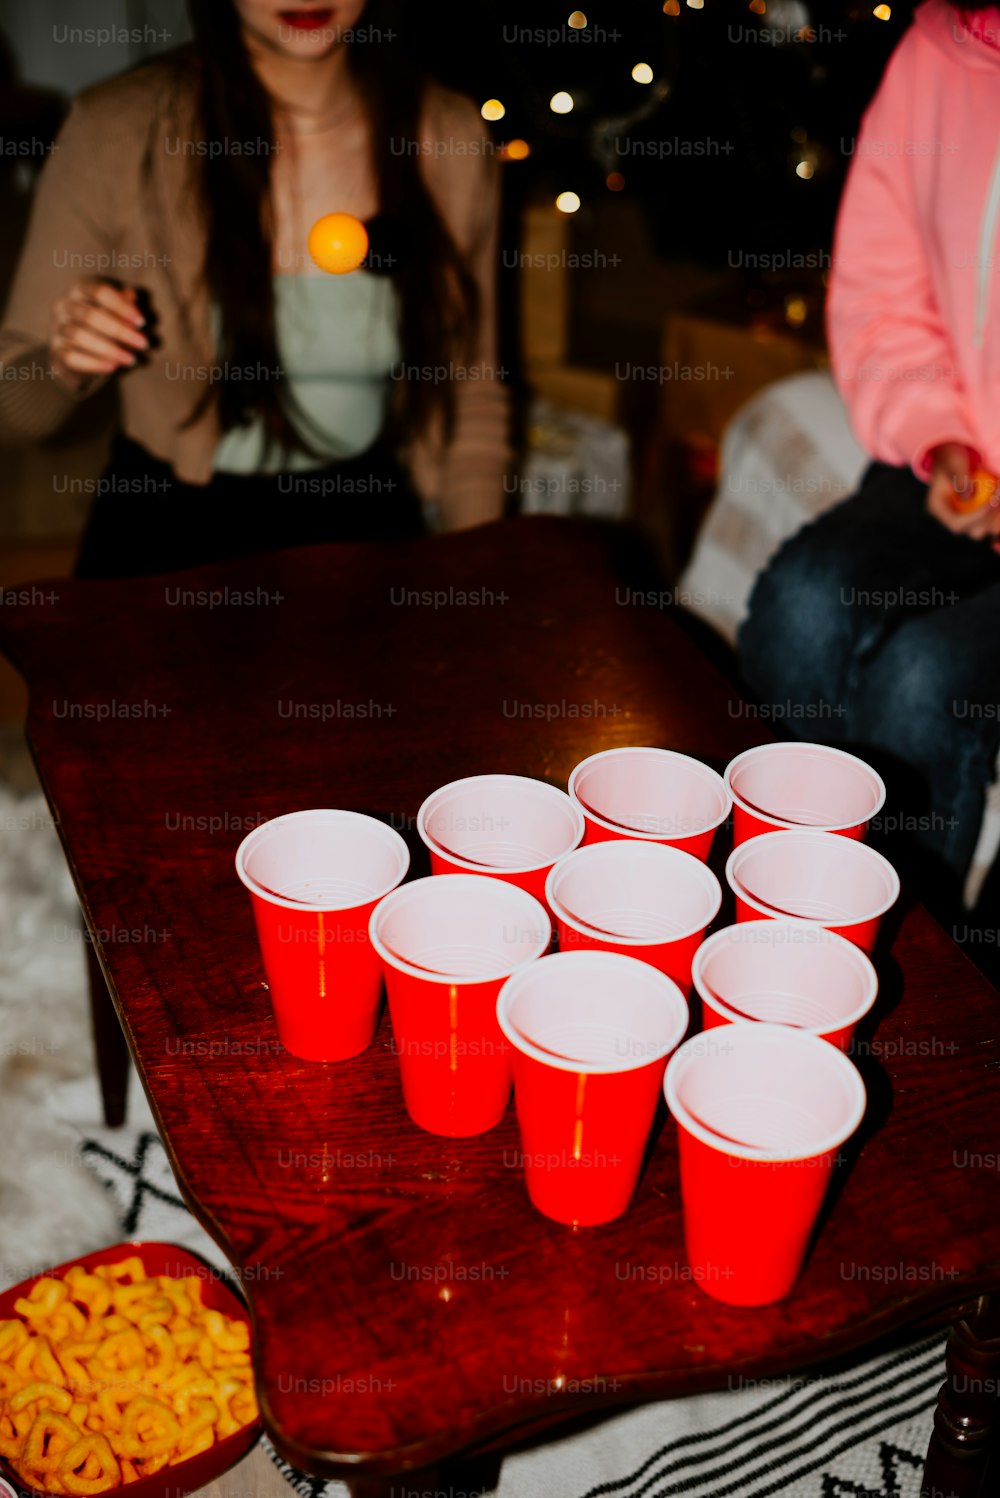 a group of people sitting around a table with cups on it